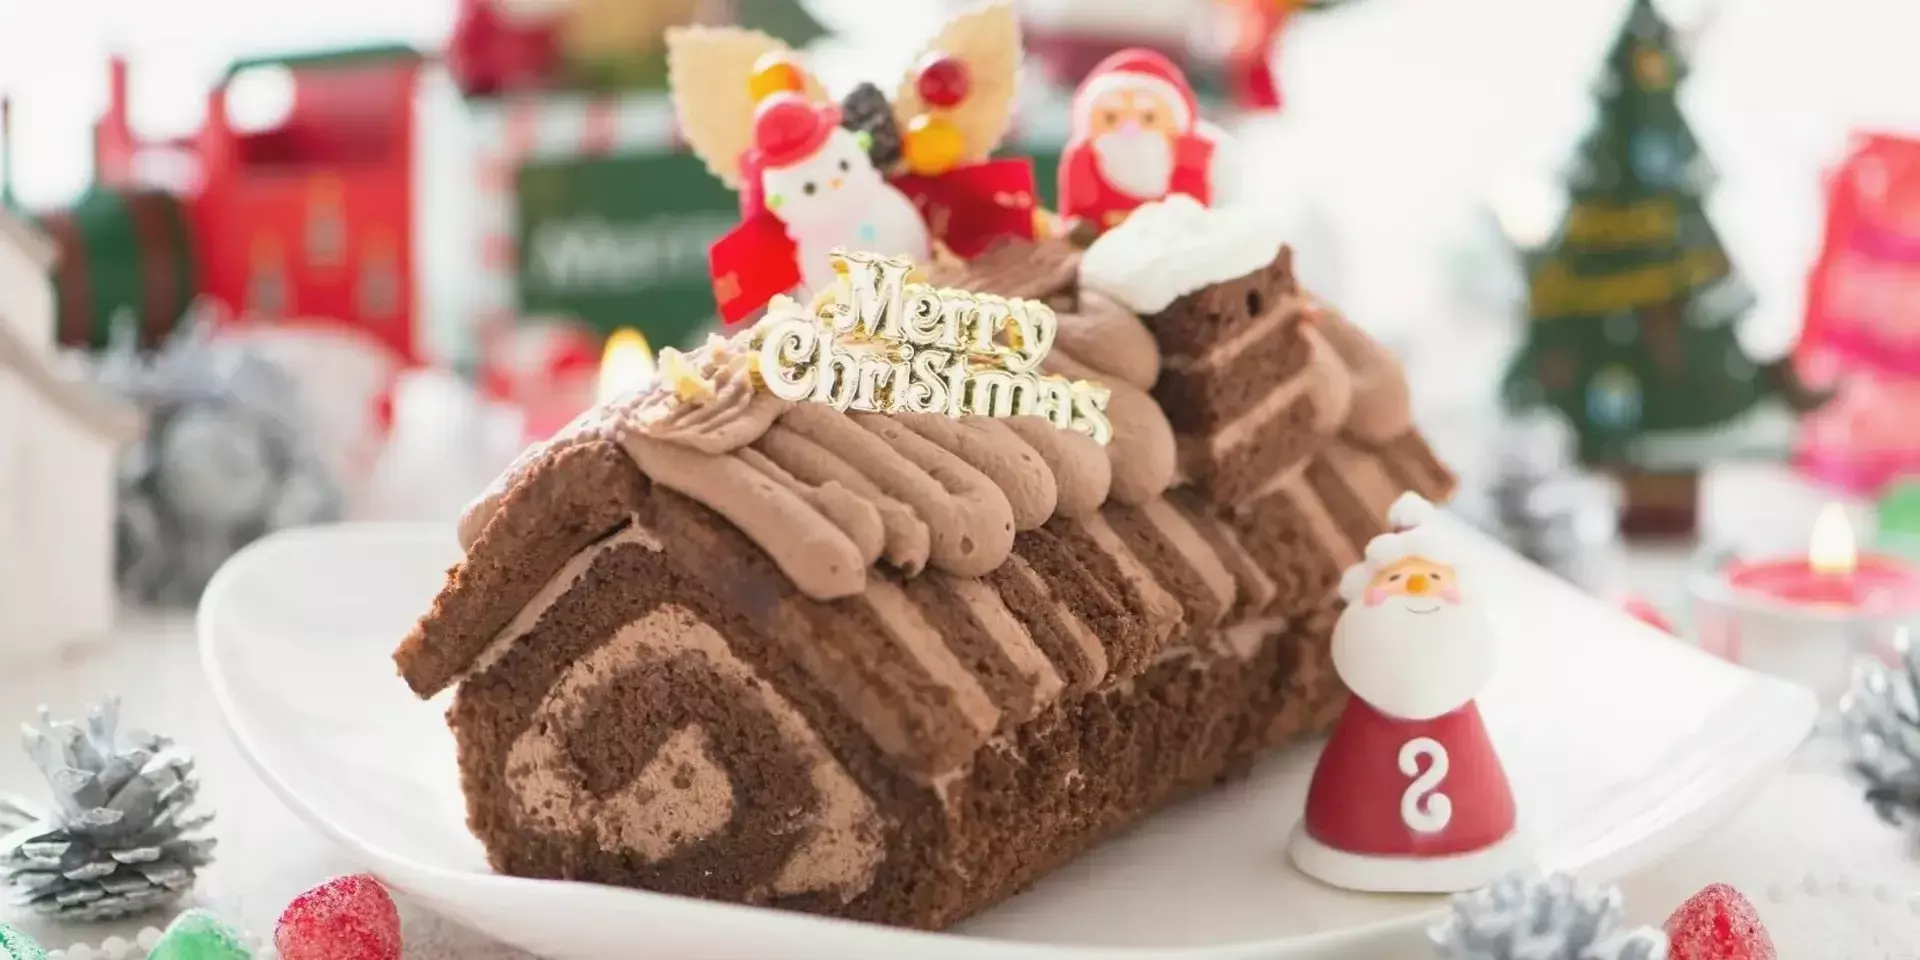 a yule log christmas dessert decorated with chocolate and santa clauses